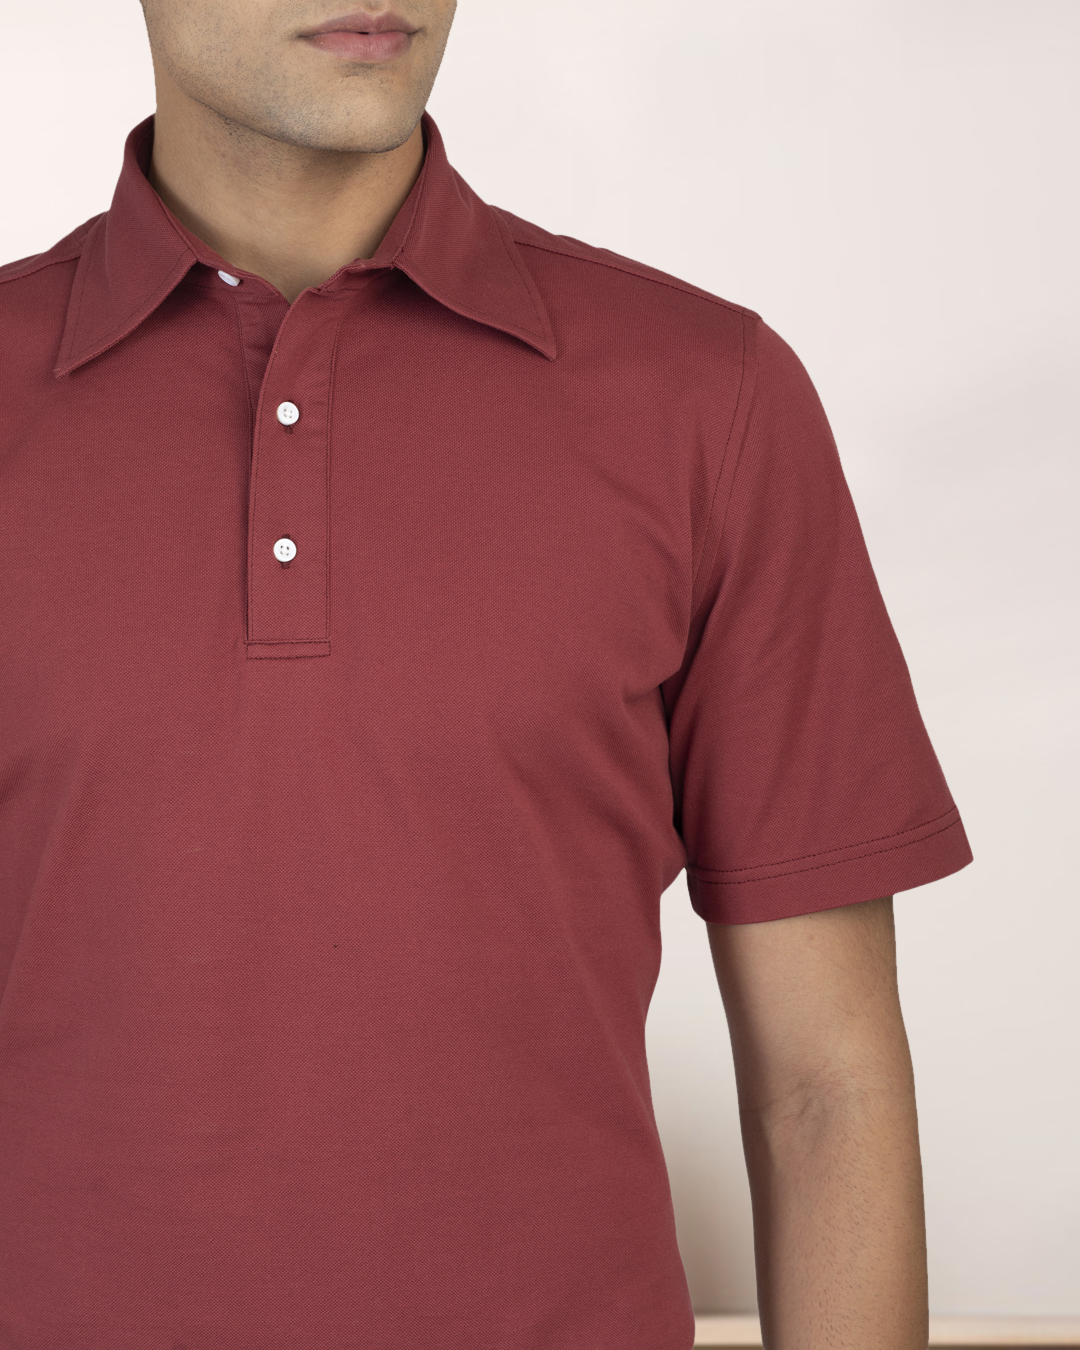 Close up of model wearing the custom oxford polo shirt for men by Luxire in soft marsala